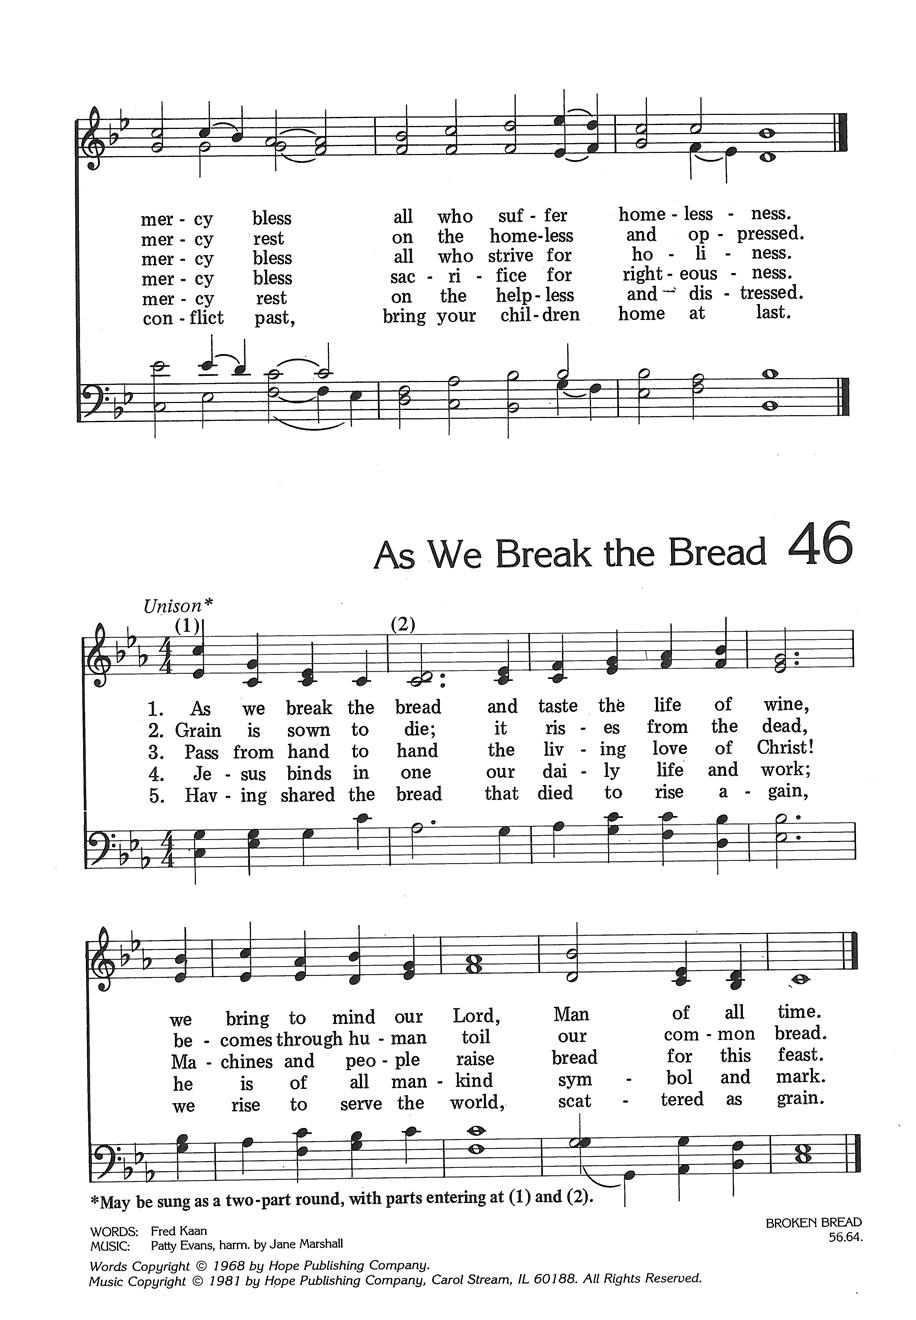 As We Break the Bread Cover Image